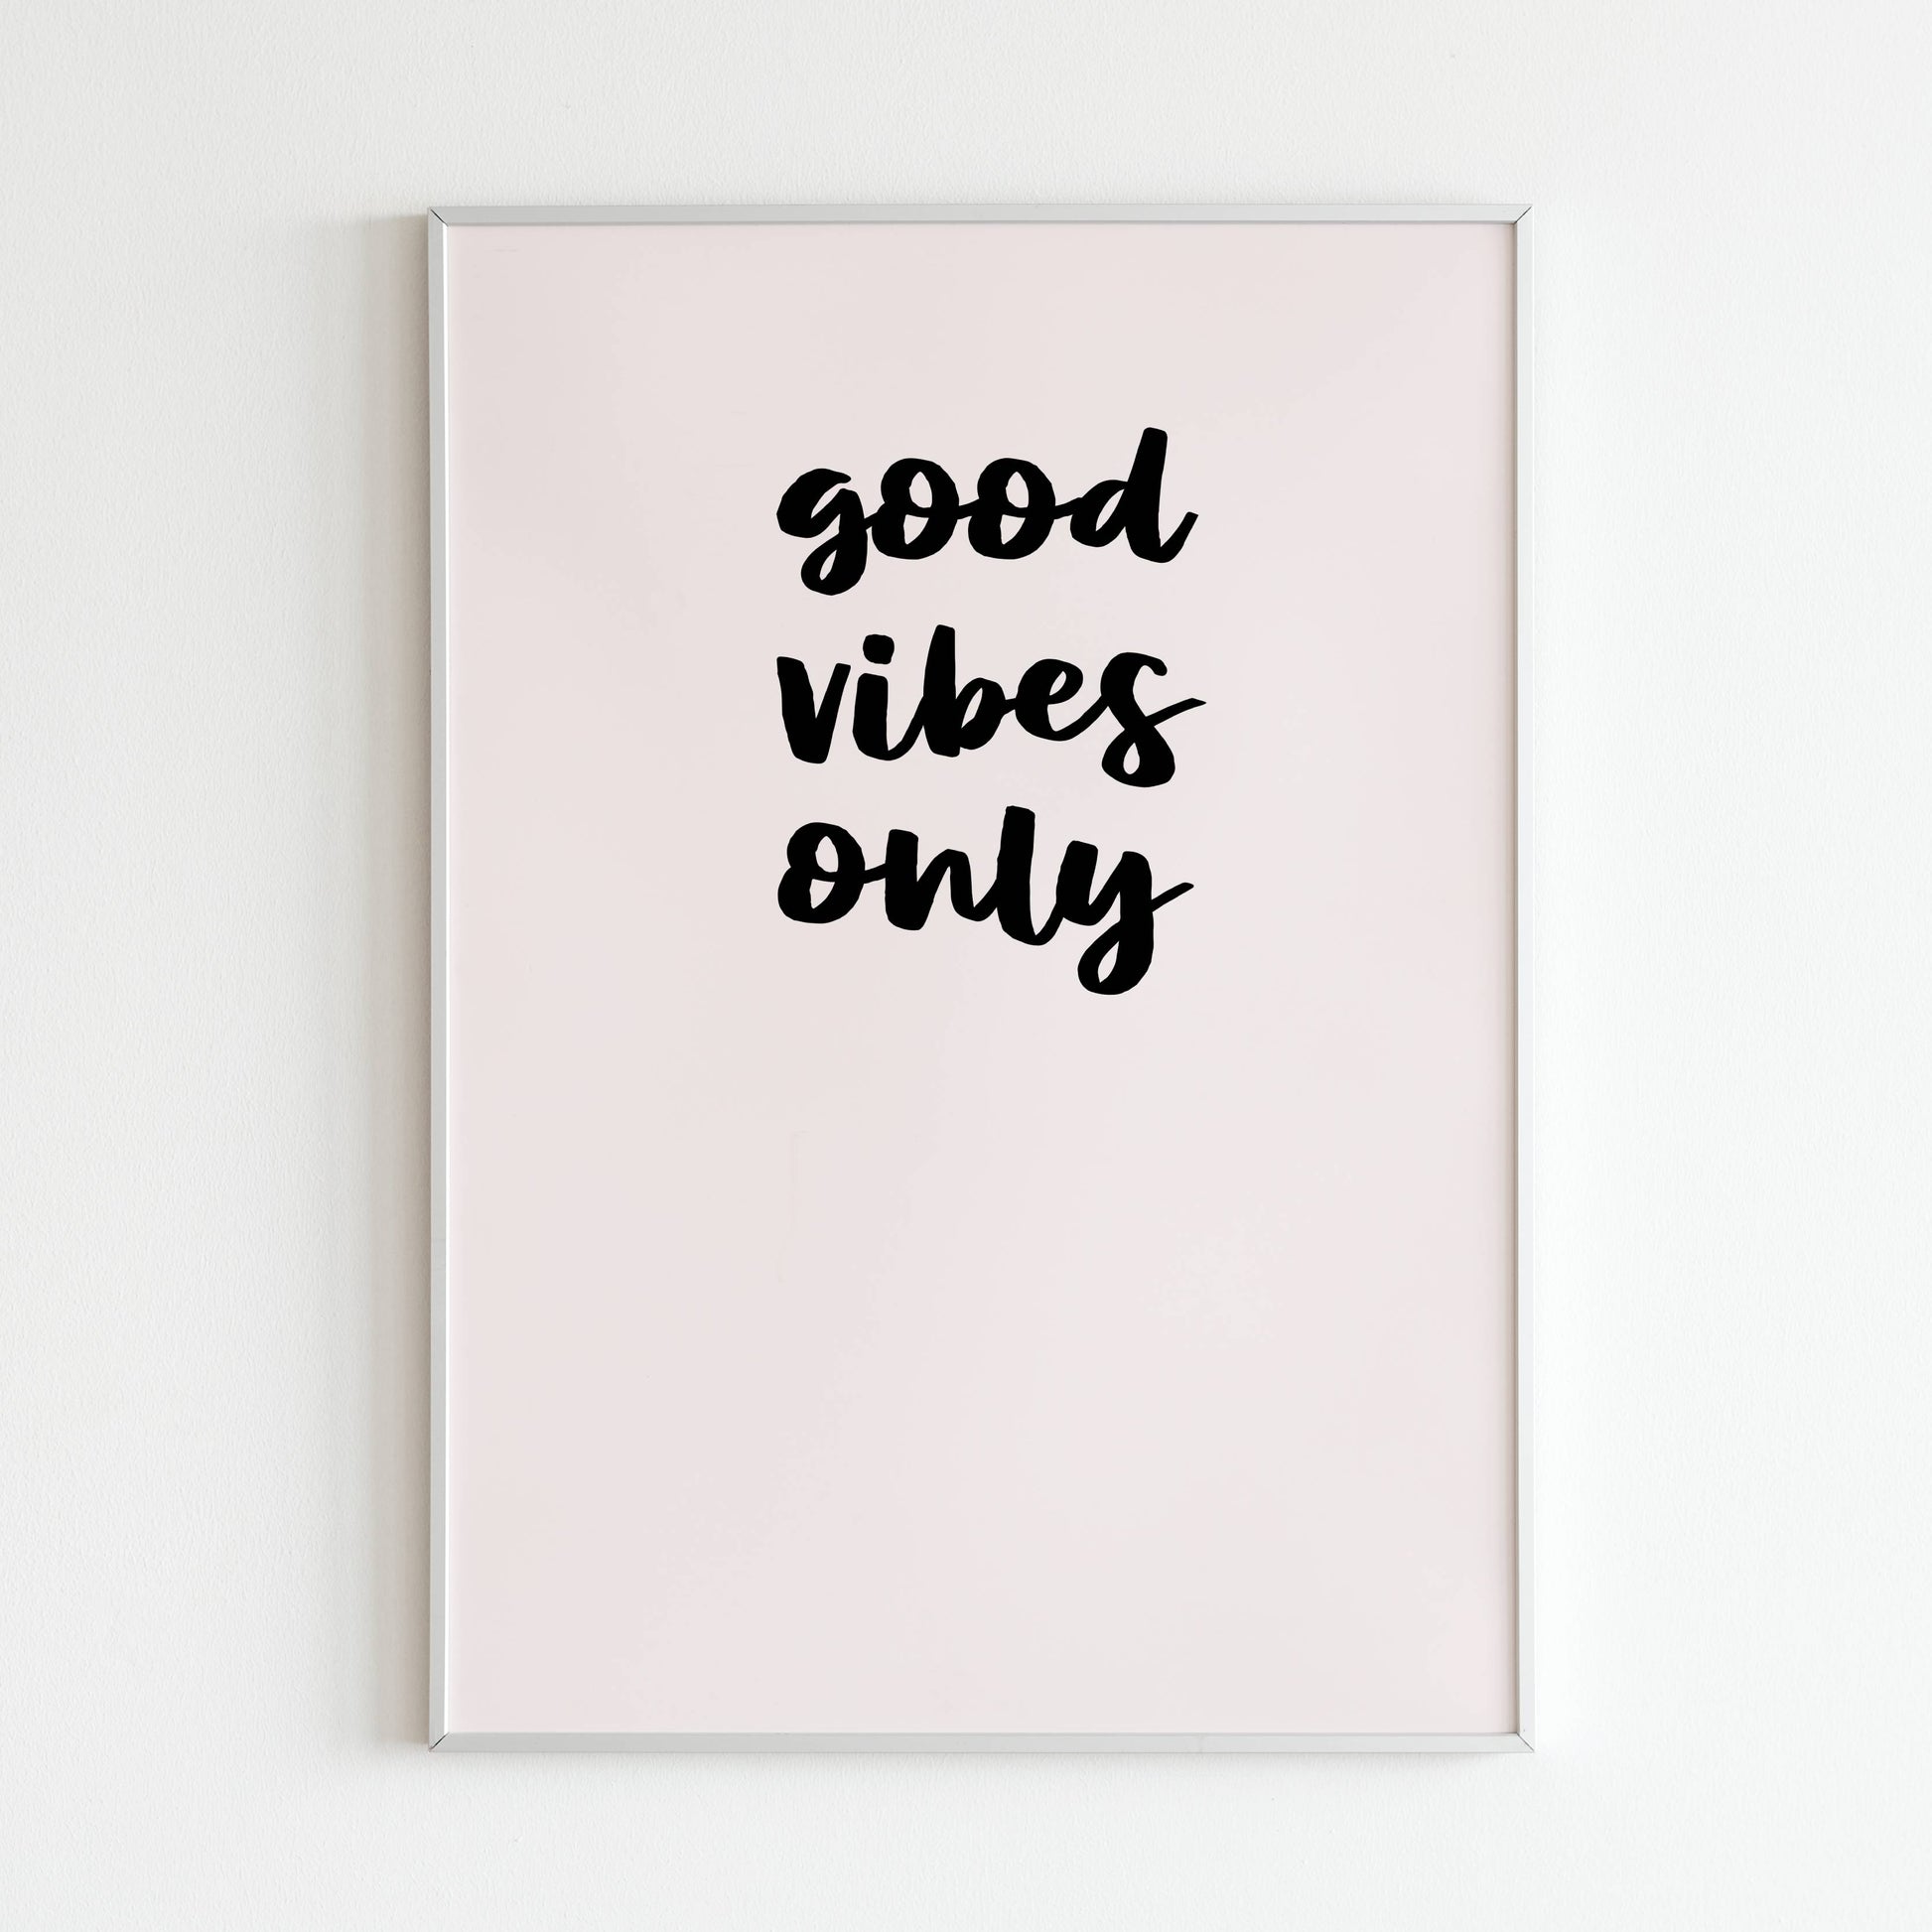 Downloadable "Good vibes only" art print, create a space filled with positive energy and inspiration.